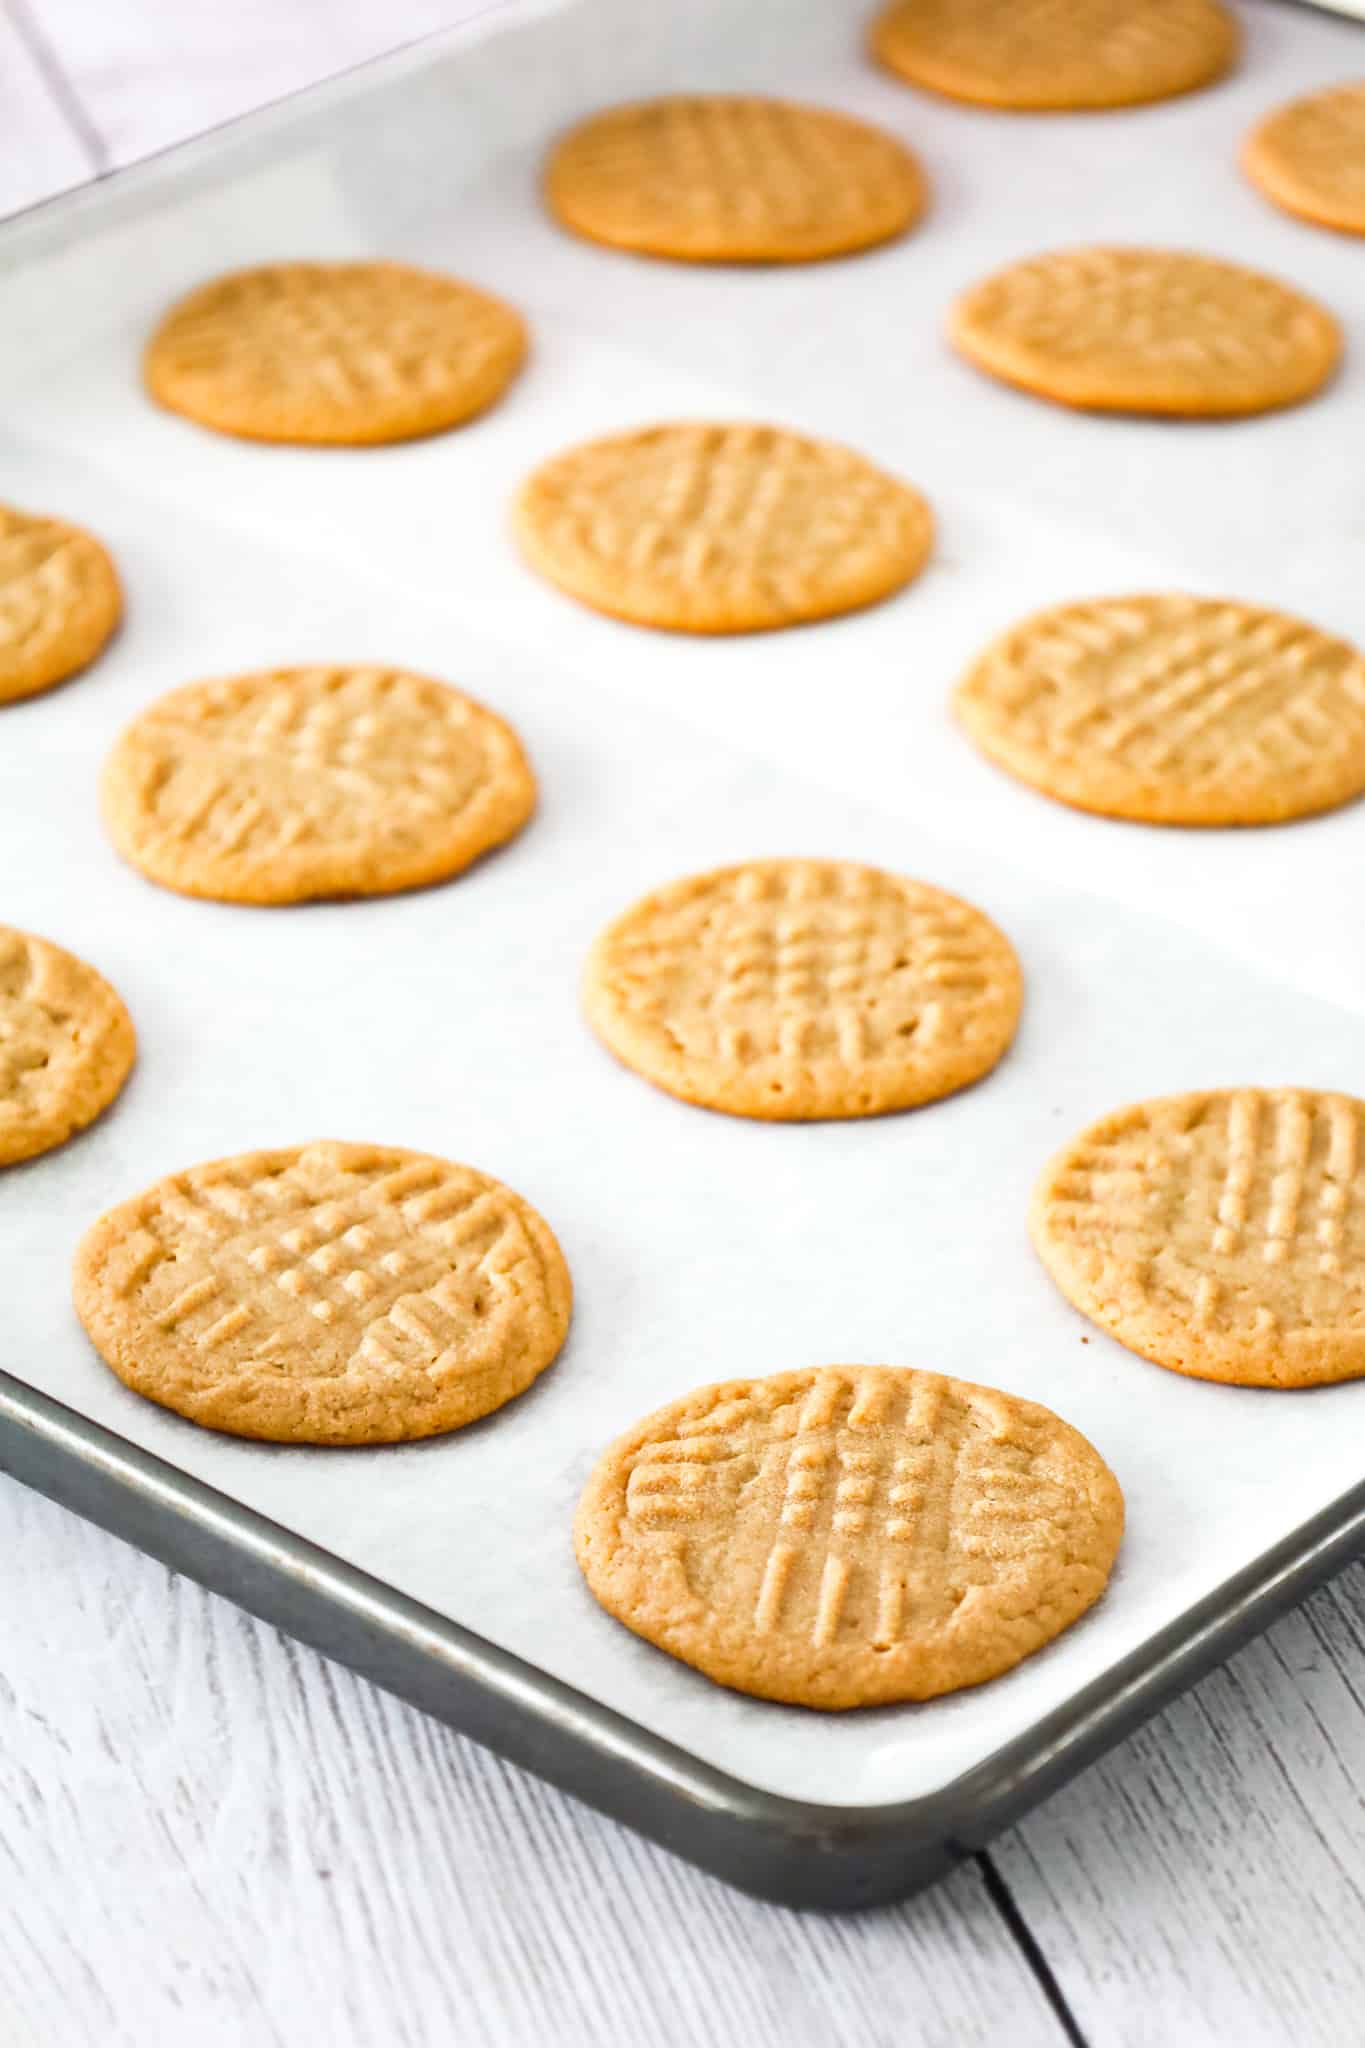 3 Ingredient Peanut Butter Cookies are chewy and delicious peanut butter cookies made using just peanut butter, brown sugar and an egg.